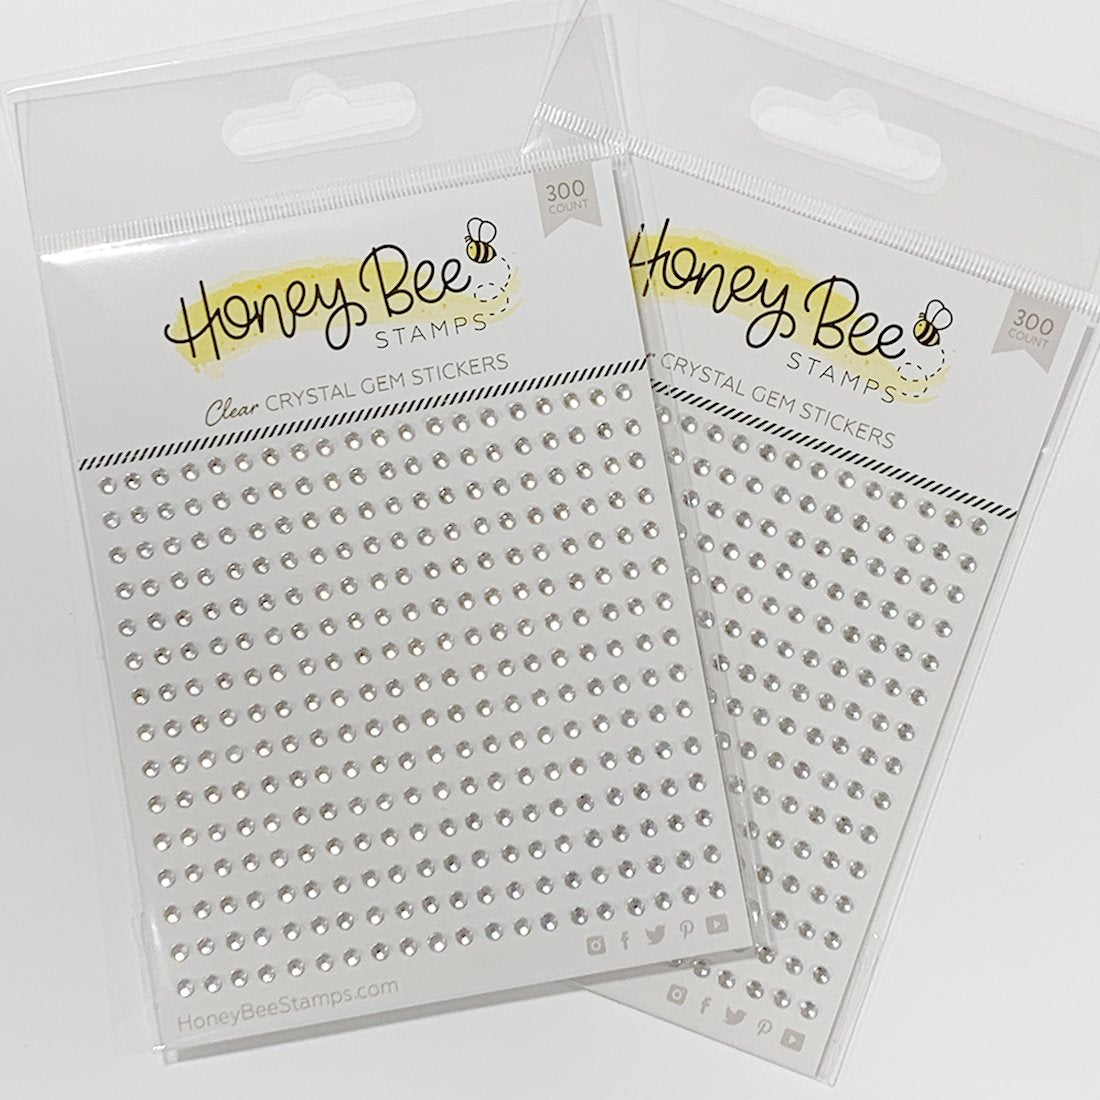 Honey Bee Stamps Crystal Clear Gem Stickers